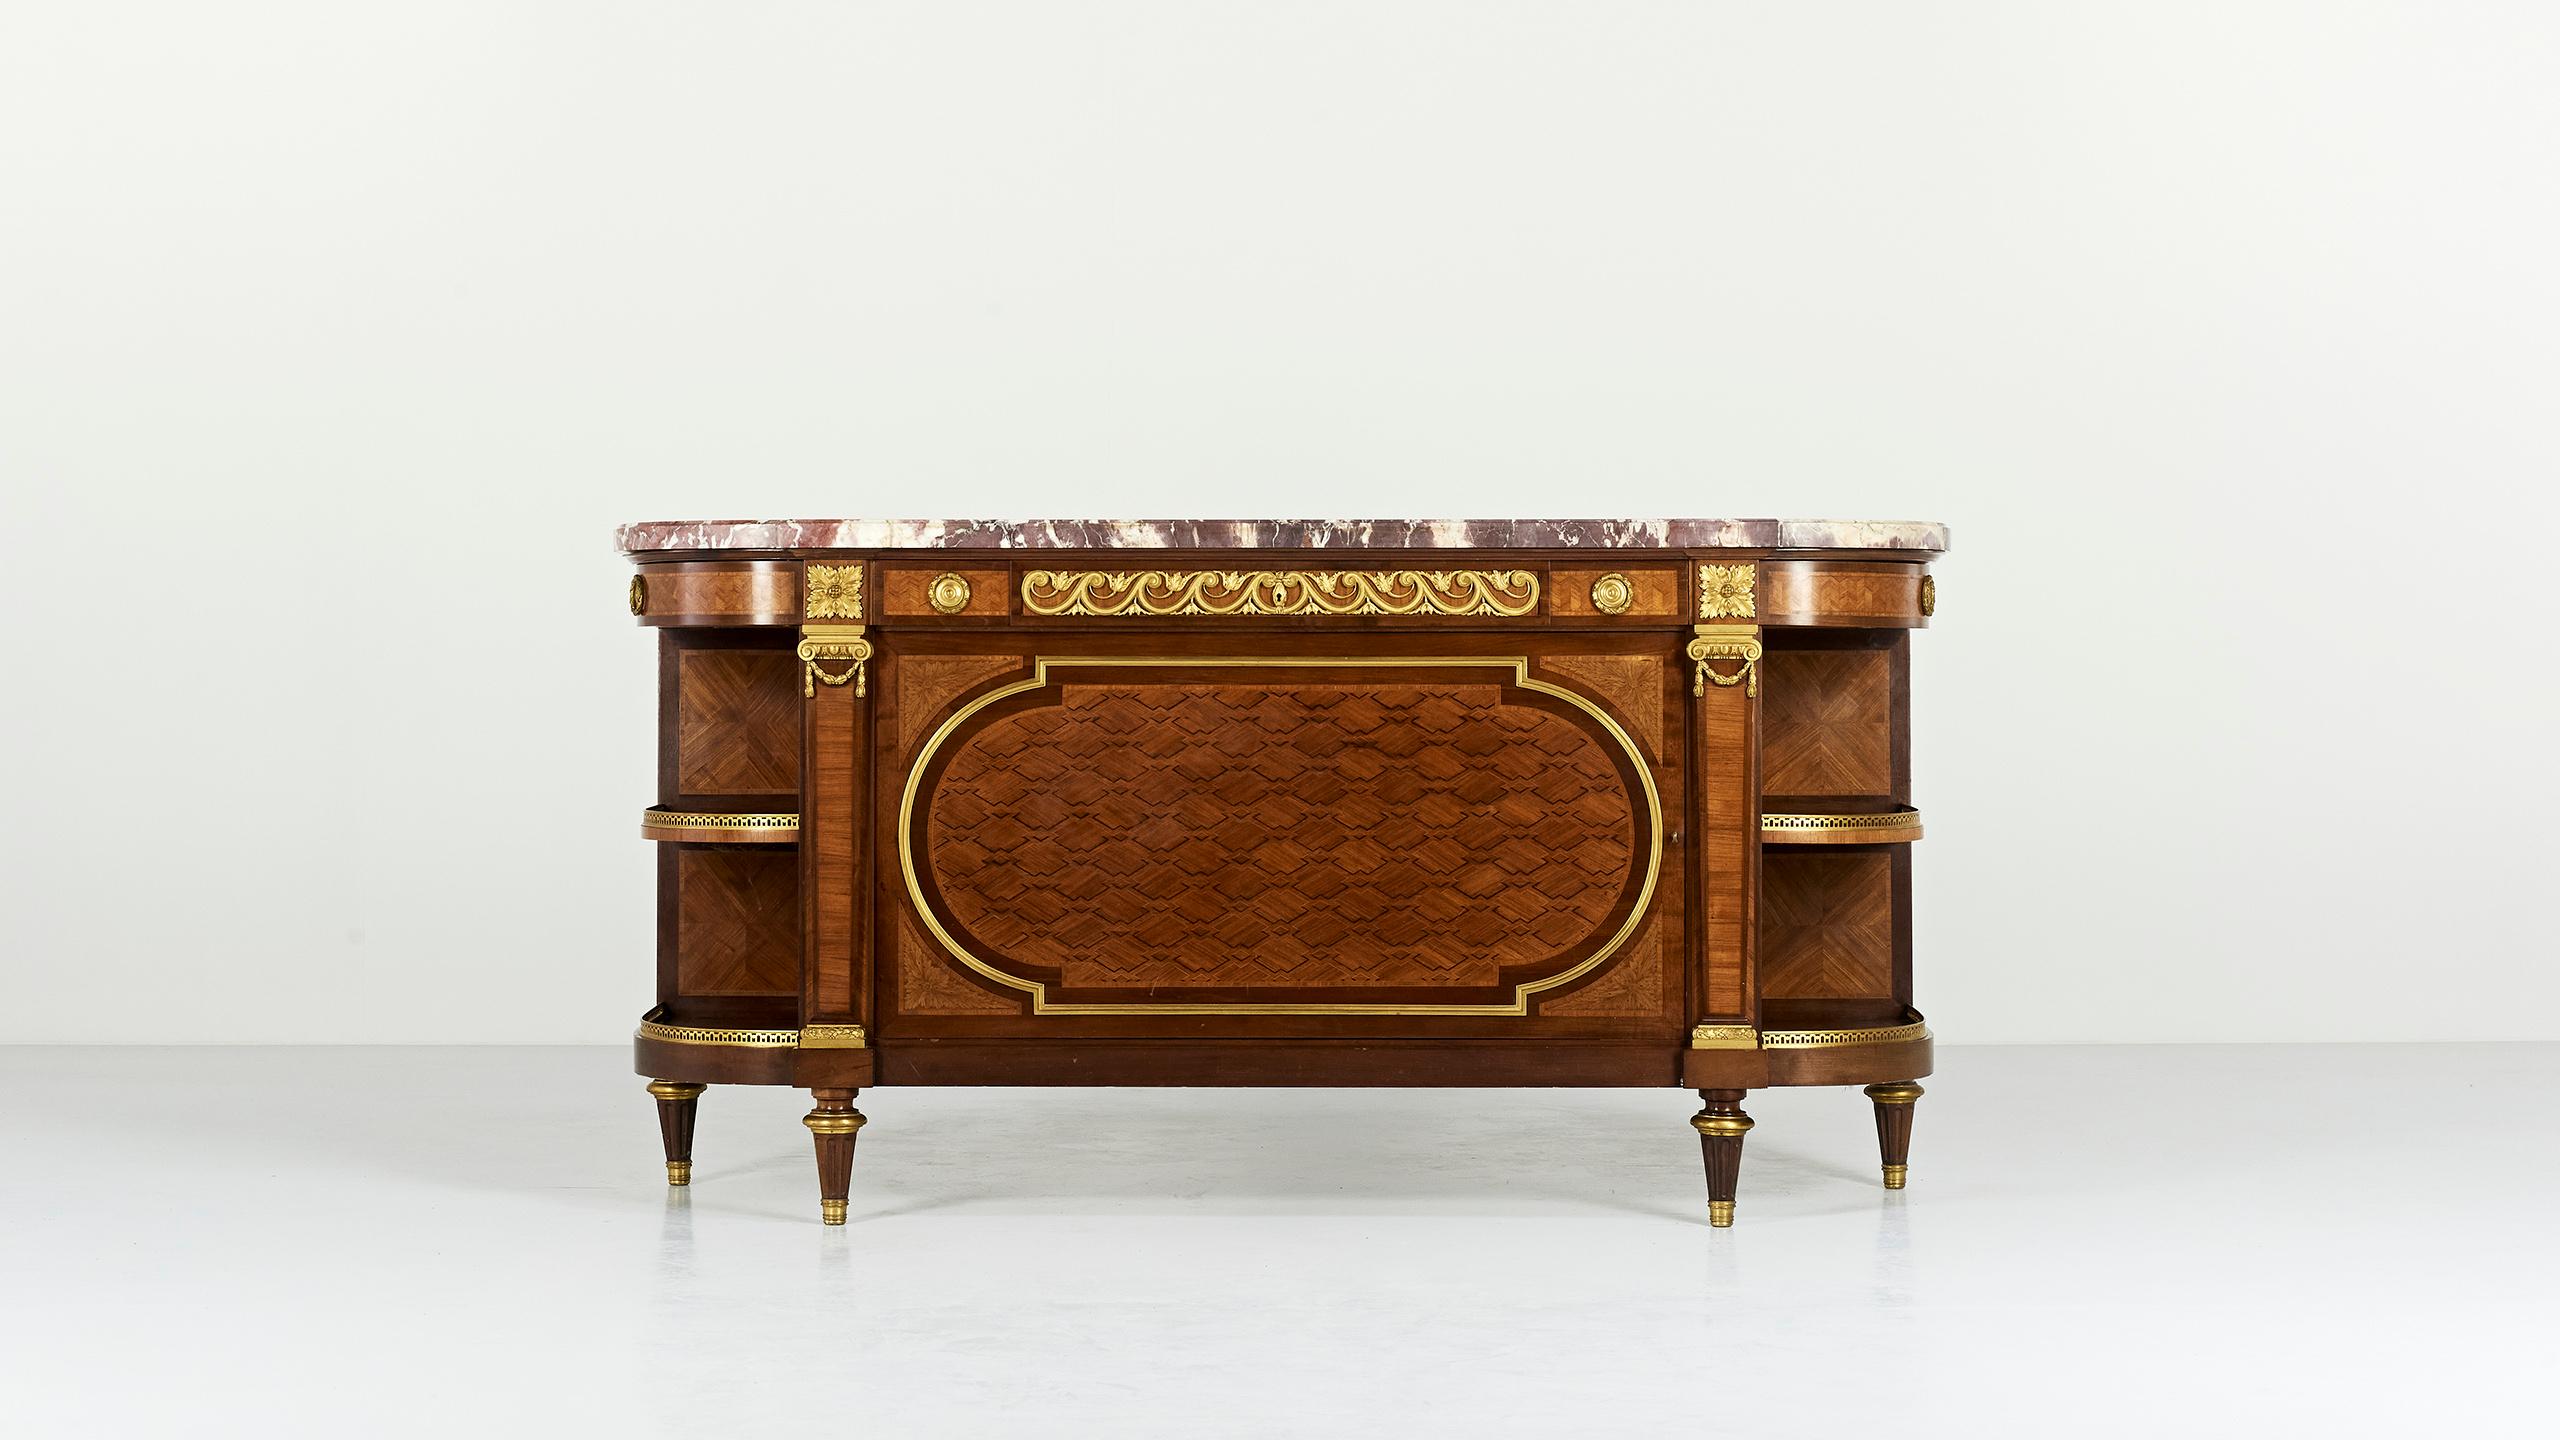 An exquisite and spectacular credenza, Louis XVI style furniture, produced around 1830 by Maison Krieger, after the work of prominent cabinetmaker Jean Francois Leleu. It displays a full mahogany marqueterie body enhanced by particularly fine ormolu